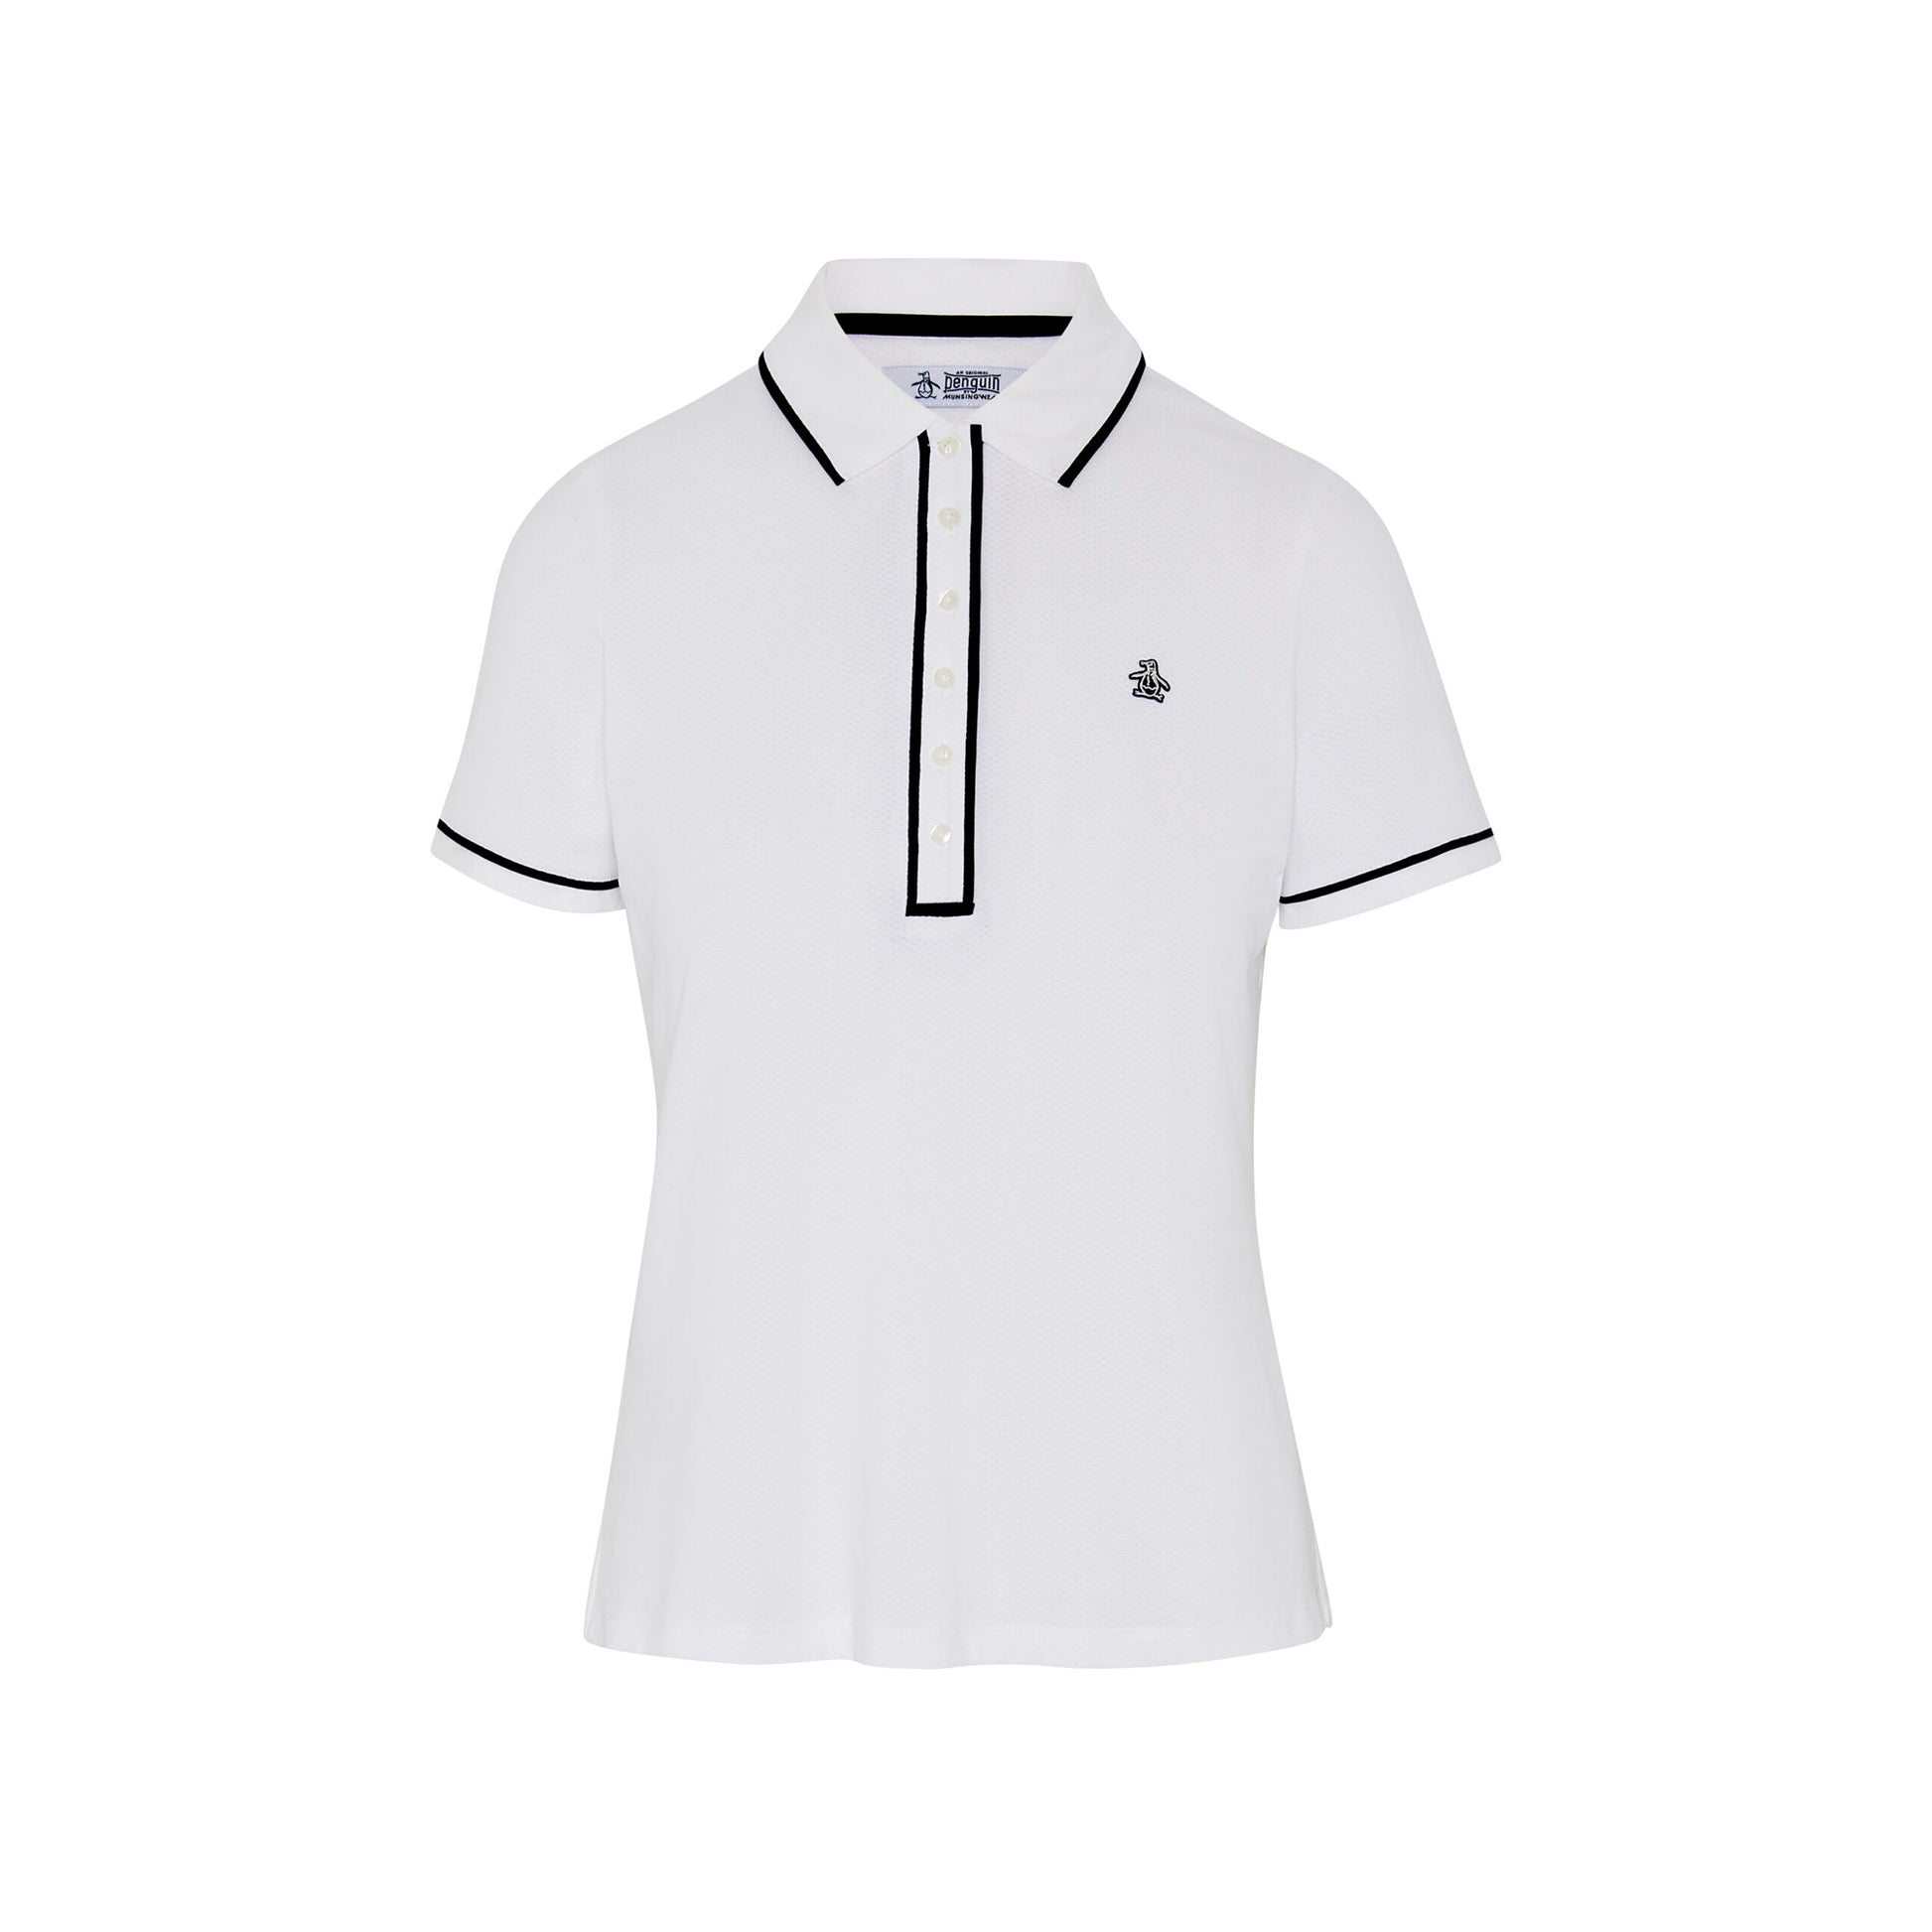 Original Penguin Ladies Bright White Short Sleeve Polo with Contrast Piping